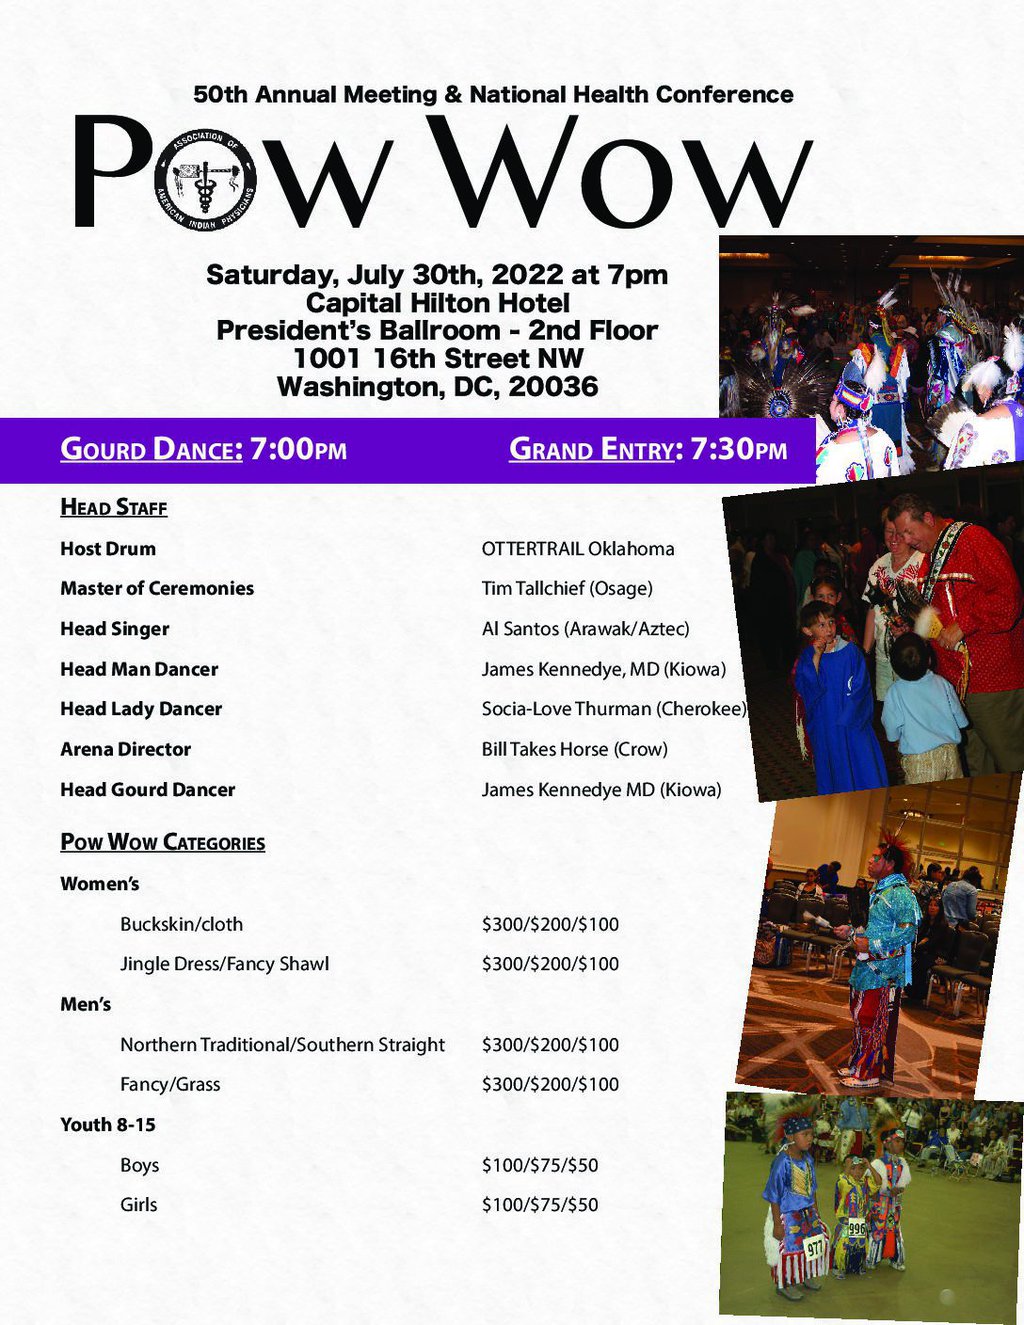 50th Annual Meeting & National Health Conference Pow Wow 2022